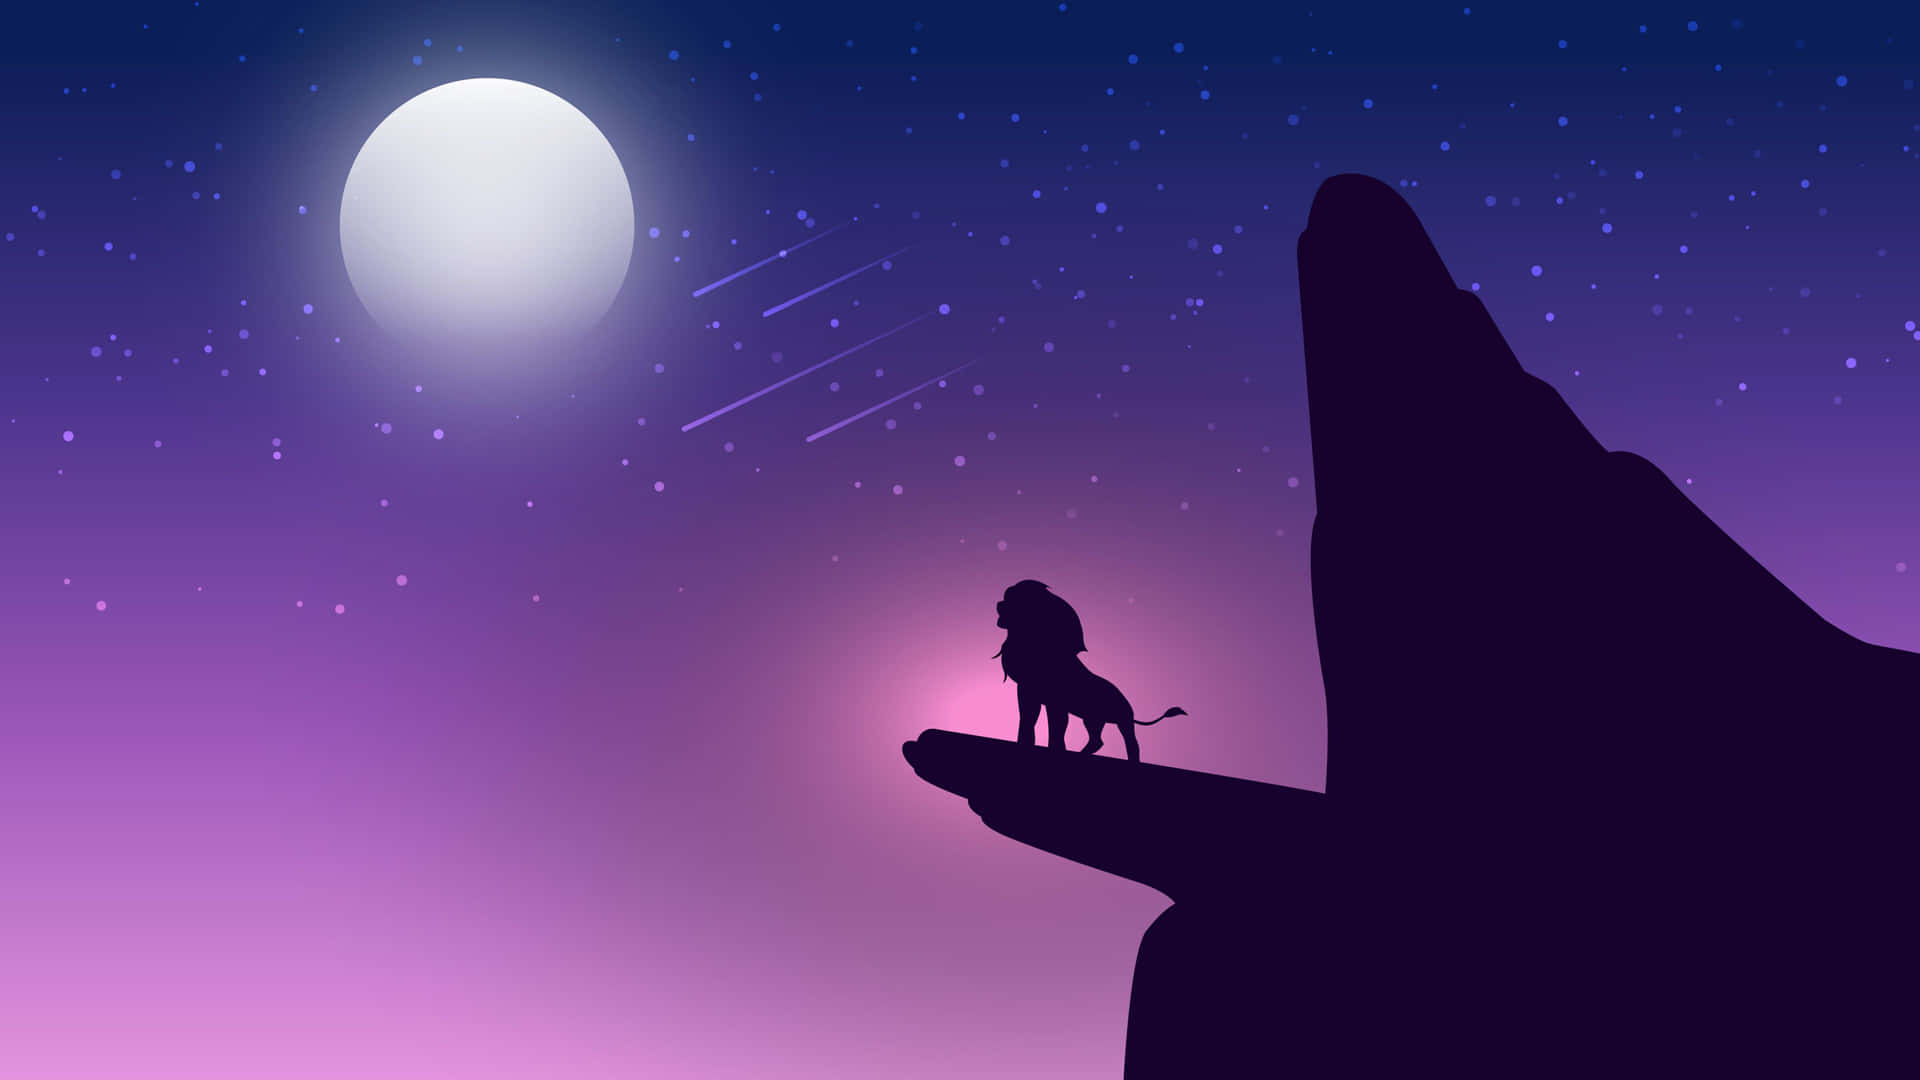 A Lion Standing On A Cliff At Night Wallpaper